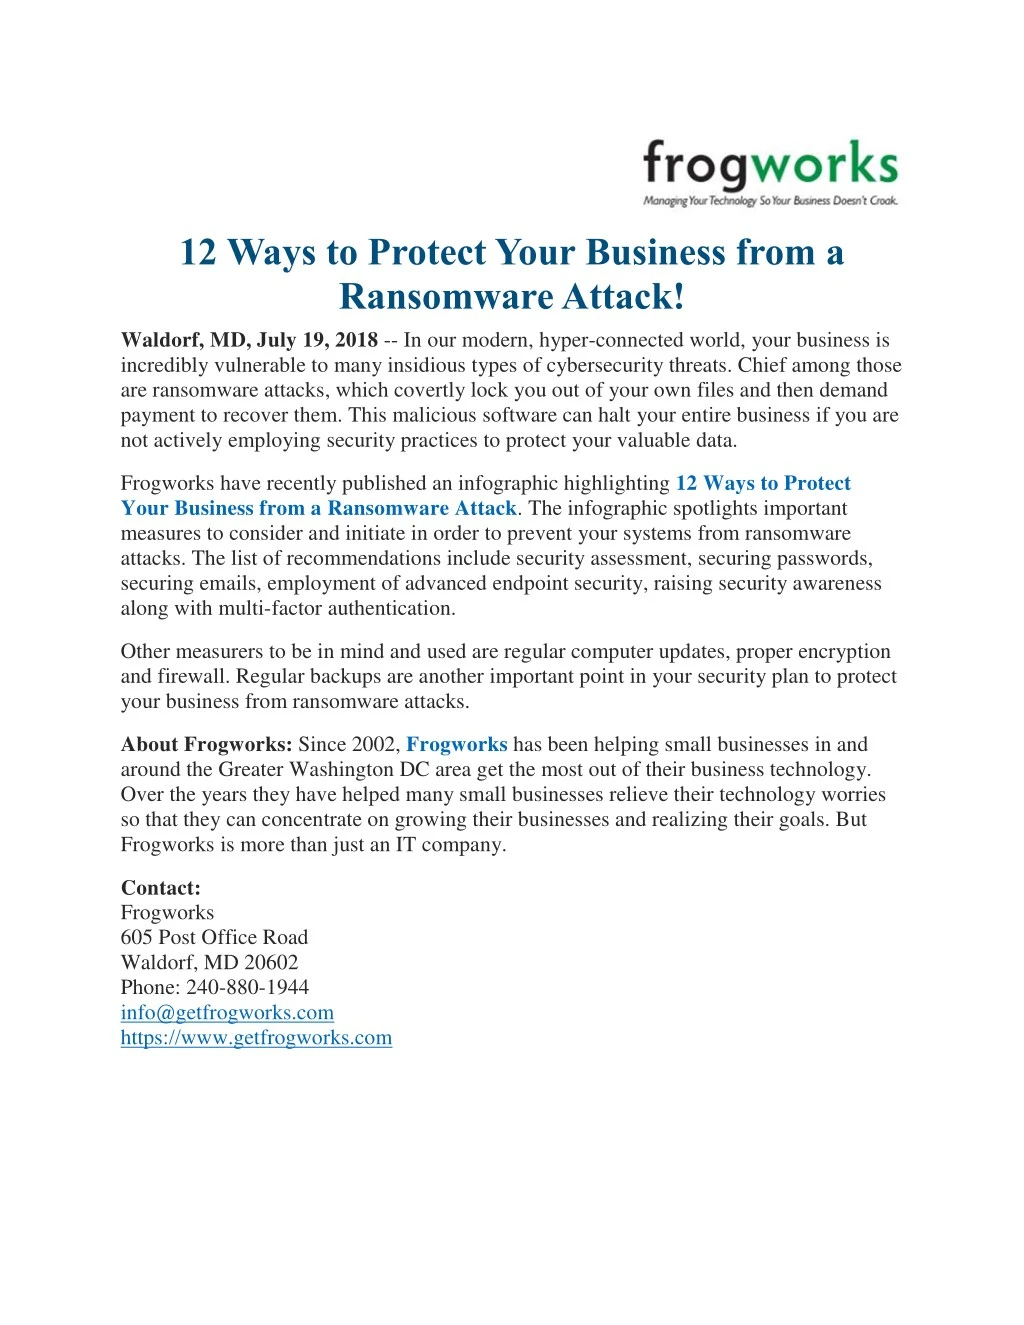 12 ways to protect your business from